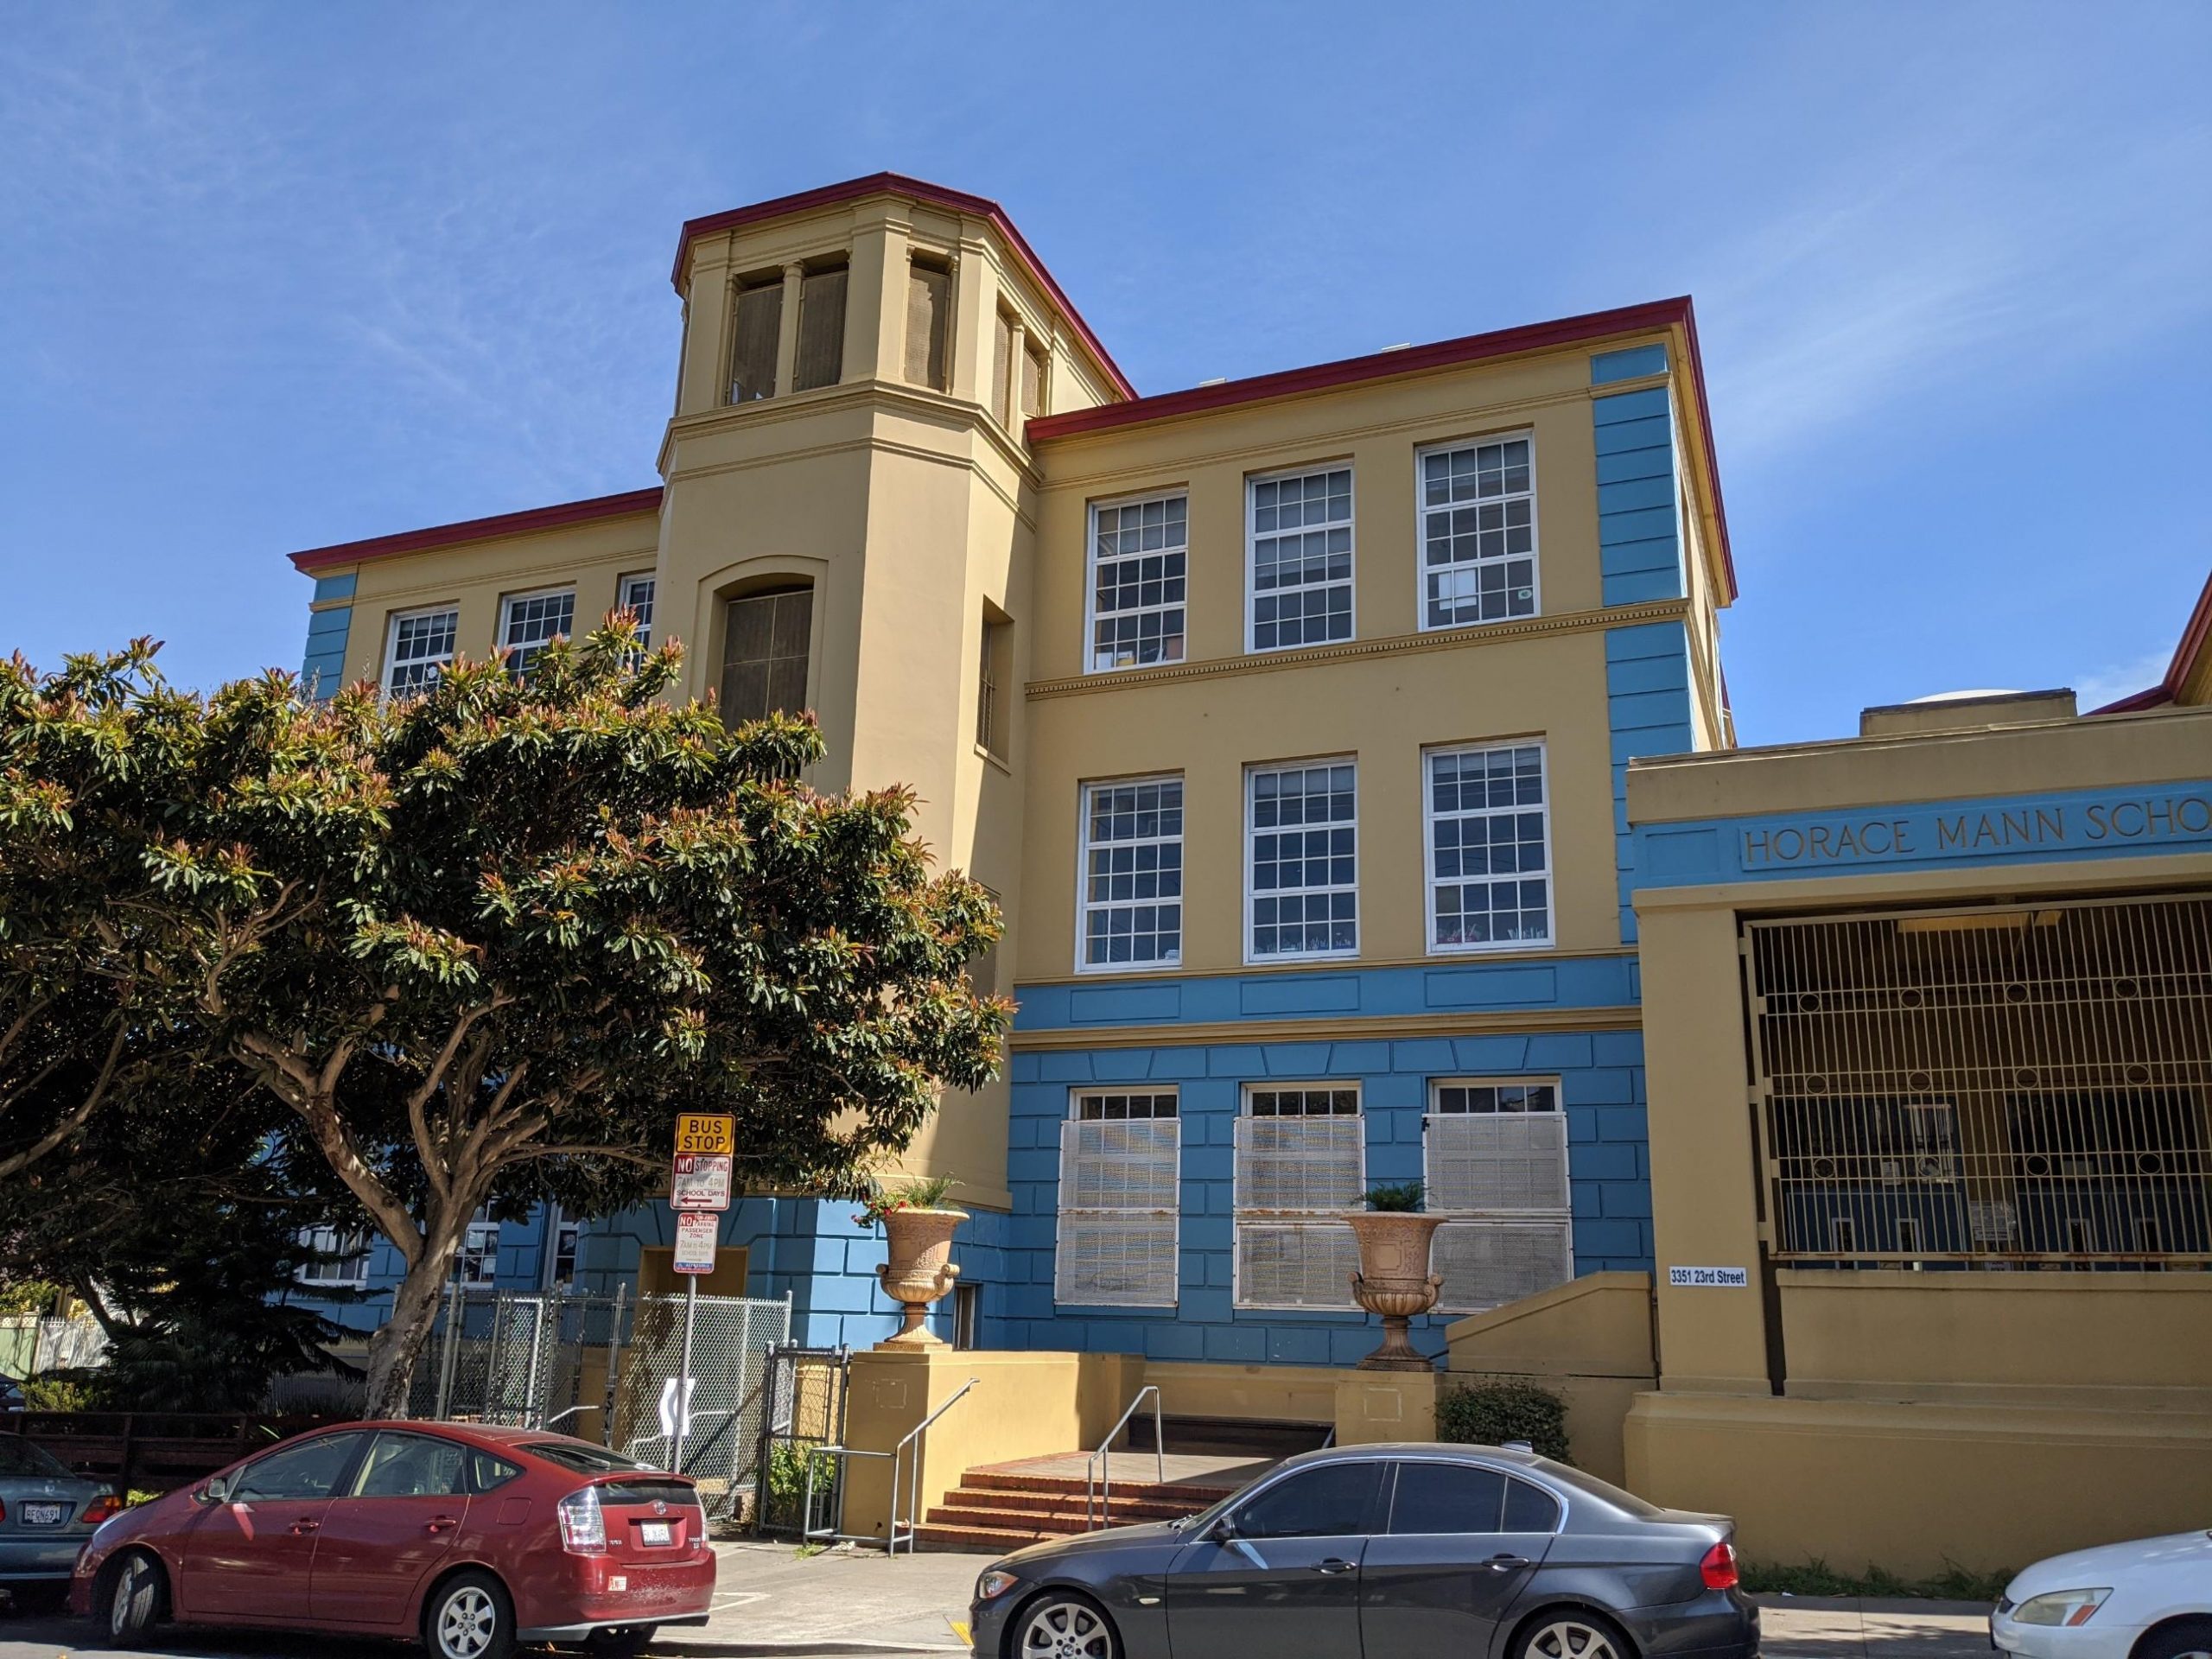 Buena Vista Horace Mann school is the site of a San Francisco school district program that provides temporary shelter for homeless students and their families. It also offers meals and instruction while the city’s shelter-in-place order is in force. Norman Clevenger / San Francisco Public Press